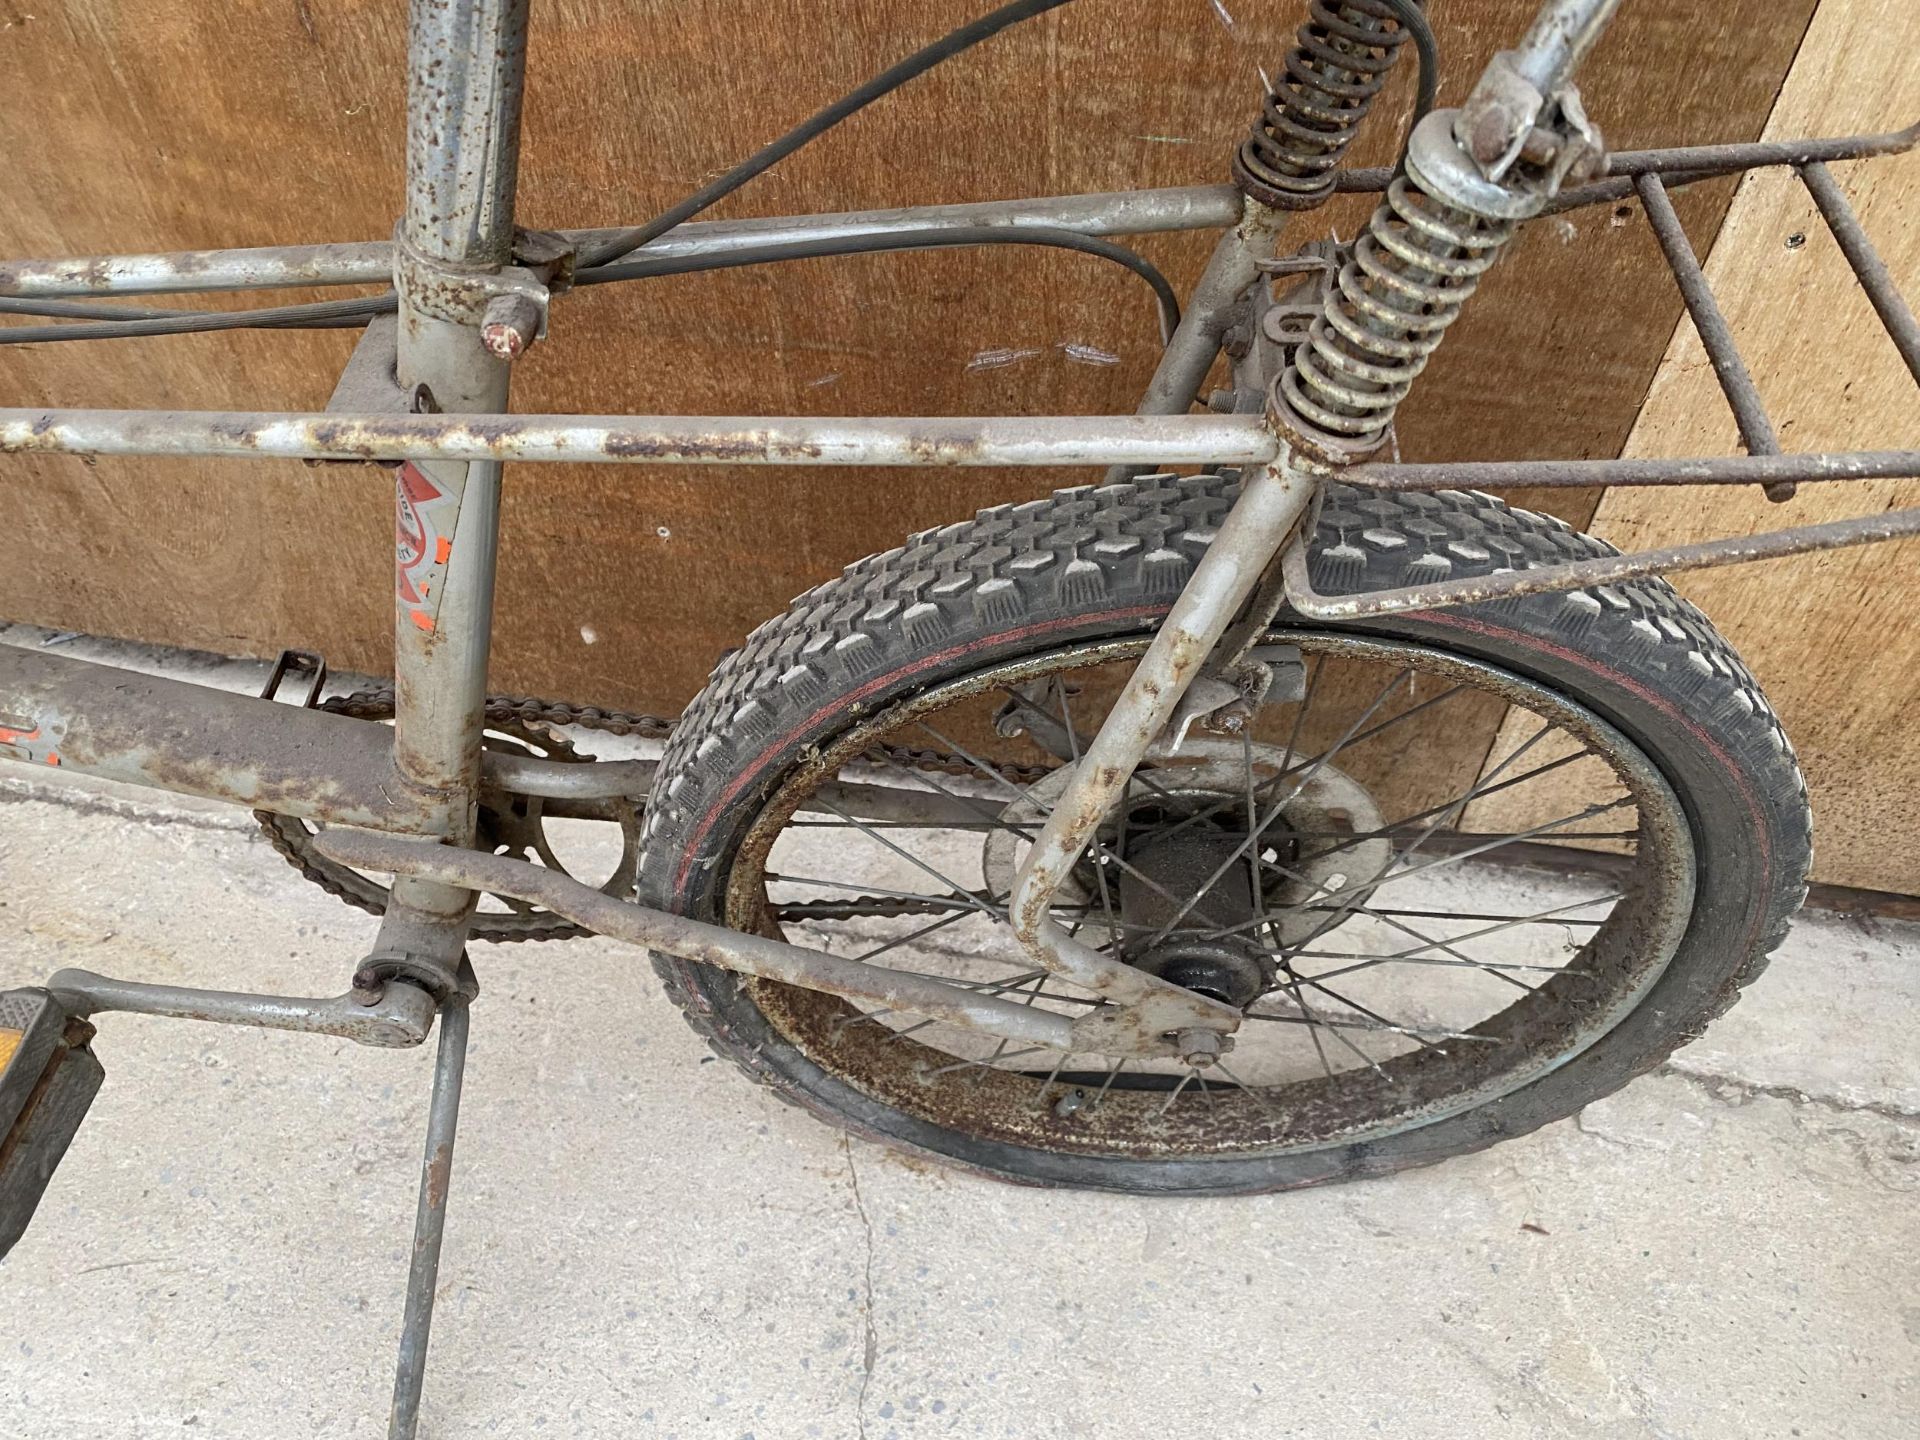 A VINTAGE RALEIGH CHOPPER BIKE - Image 4 of 6